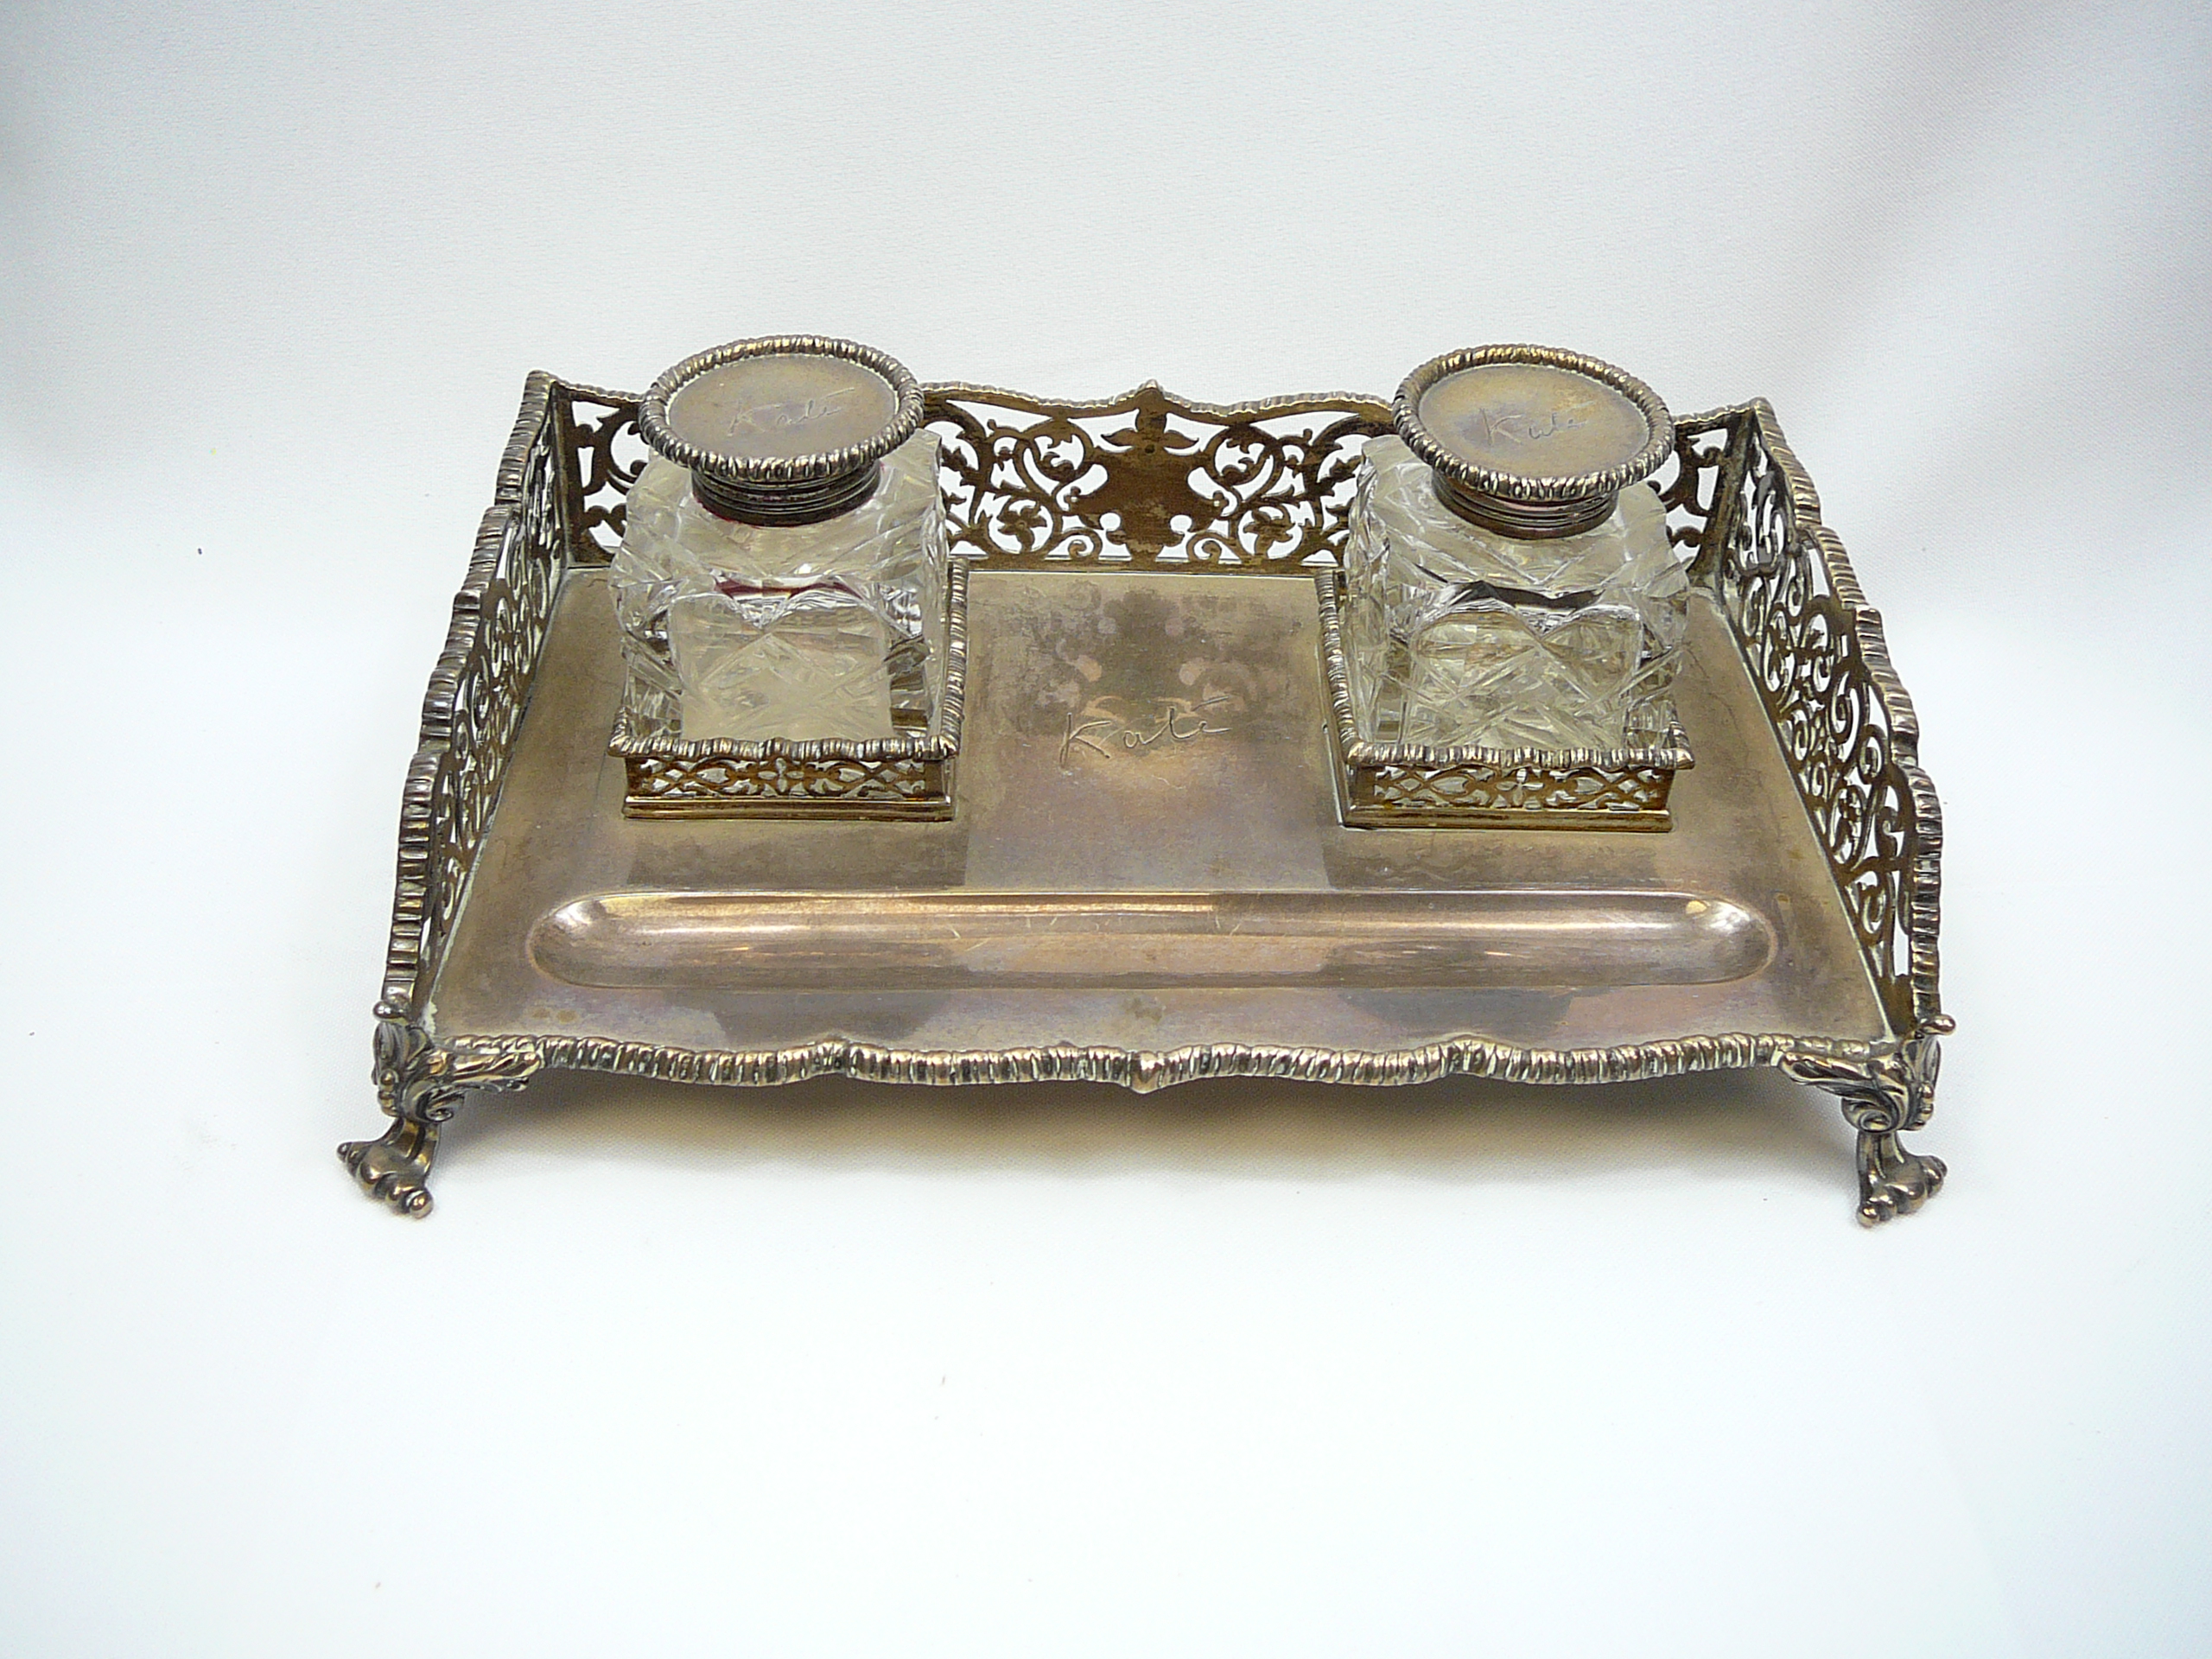 Kate's Silver Desk Stand. (General Lord Henry Horne) - Image 5 of 10